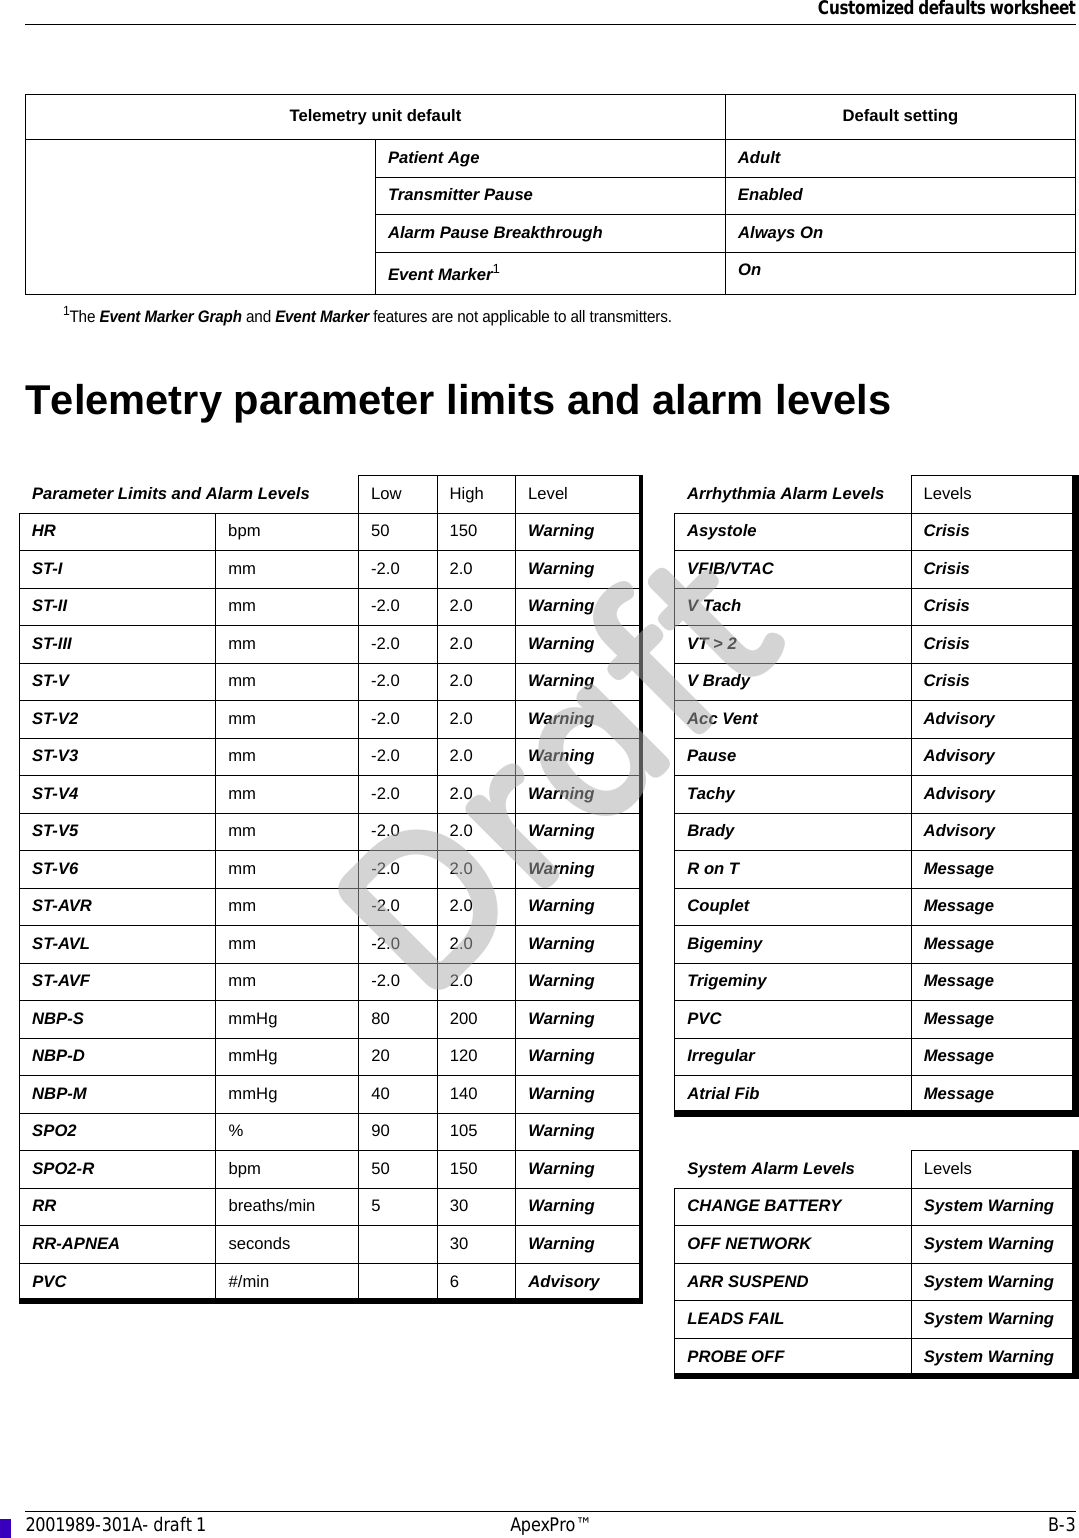 Customized defaults worksheet2001989-301A- draft 1 ApexPro™ B-3Telemetry parameter limits and alarm levelsPatient Age AdultTransmitter Pause EnabledAlarm Pause Breakthrough Always OnEvent Marker1On1The Event Marker Graph and Event Marker features are not applicable to all transmitters.Telemetry unit default Default settingParameter Limits and Alarm Levels Low High Level Arrhythmia Alarm Levels LevelsHR bpm 50 150 Warning Asystole CrisisST-I mm -2.0 2.0 Warning VFIB/VTAC CrisisST-II mm -2.0 2.0 Warning V Tach CrisisST-III mm -2.0 2.0 Warning VT &gt; 2 CrisisST-V mm -2.0 2.0 Warning V Brady CrisisST-V2 mm -2.0 2.0 Warning Acc Vent AdvisoryST-V3 mm -2.0 2.0 Warning Pause AdvisoryST-V4 mm -2.0 2.0 Warning Tachy AdvisoryST-V5 mm -2.0 2.0 Warning Brady AdvisoryST-V6 mm -2.0 2.0 Warning R on T MessageST-AVR mm -2.0 2.0 Warning Couplet MessageST-AVL mm -2.0 2.0 Warning Bigeminy MessageST-AVF mm -2.0 2.0 Warning Trigeminy MessageNBP-S mmHg 80 200 Warning PVC MessageNBP-D mmHg 20 120 Warning Irregular MessageNBP-M mmHg 40 140 Warning Atrial Fib MessageSPO2 % 90 105 WarningSPO2-R bpm 50 150 Warning System Alarm Levels LevelsRR breaths/min 5 30 Warning CHANGE BATTERY System WarningRR-APNEA seconds 30 Warning OFF NETWORK System WarningPVC #/min 6 Advisory ARR SUSPEND System WarningLEADS FAIL System WarningPROBE OFF System WarningDraft